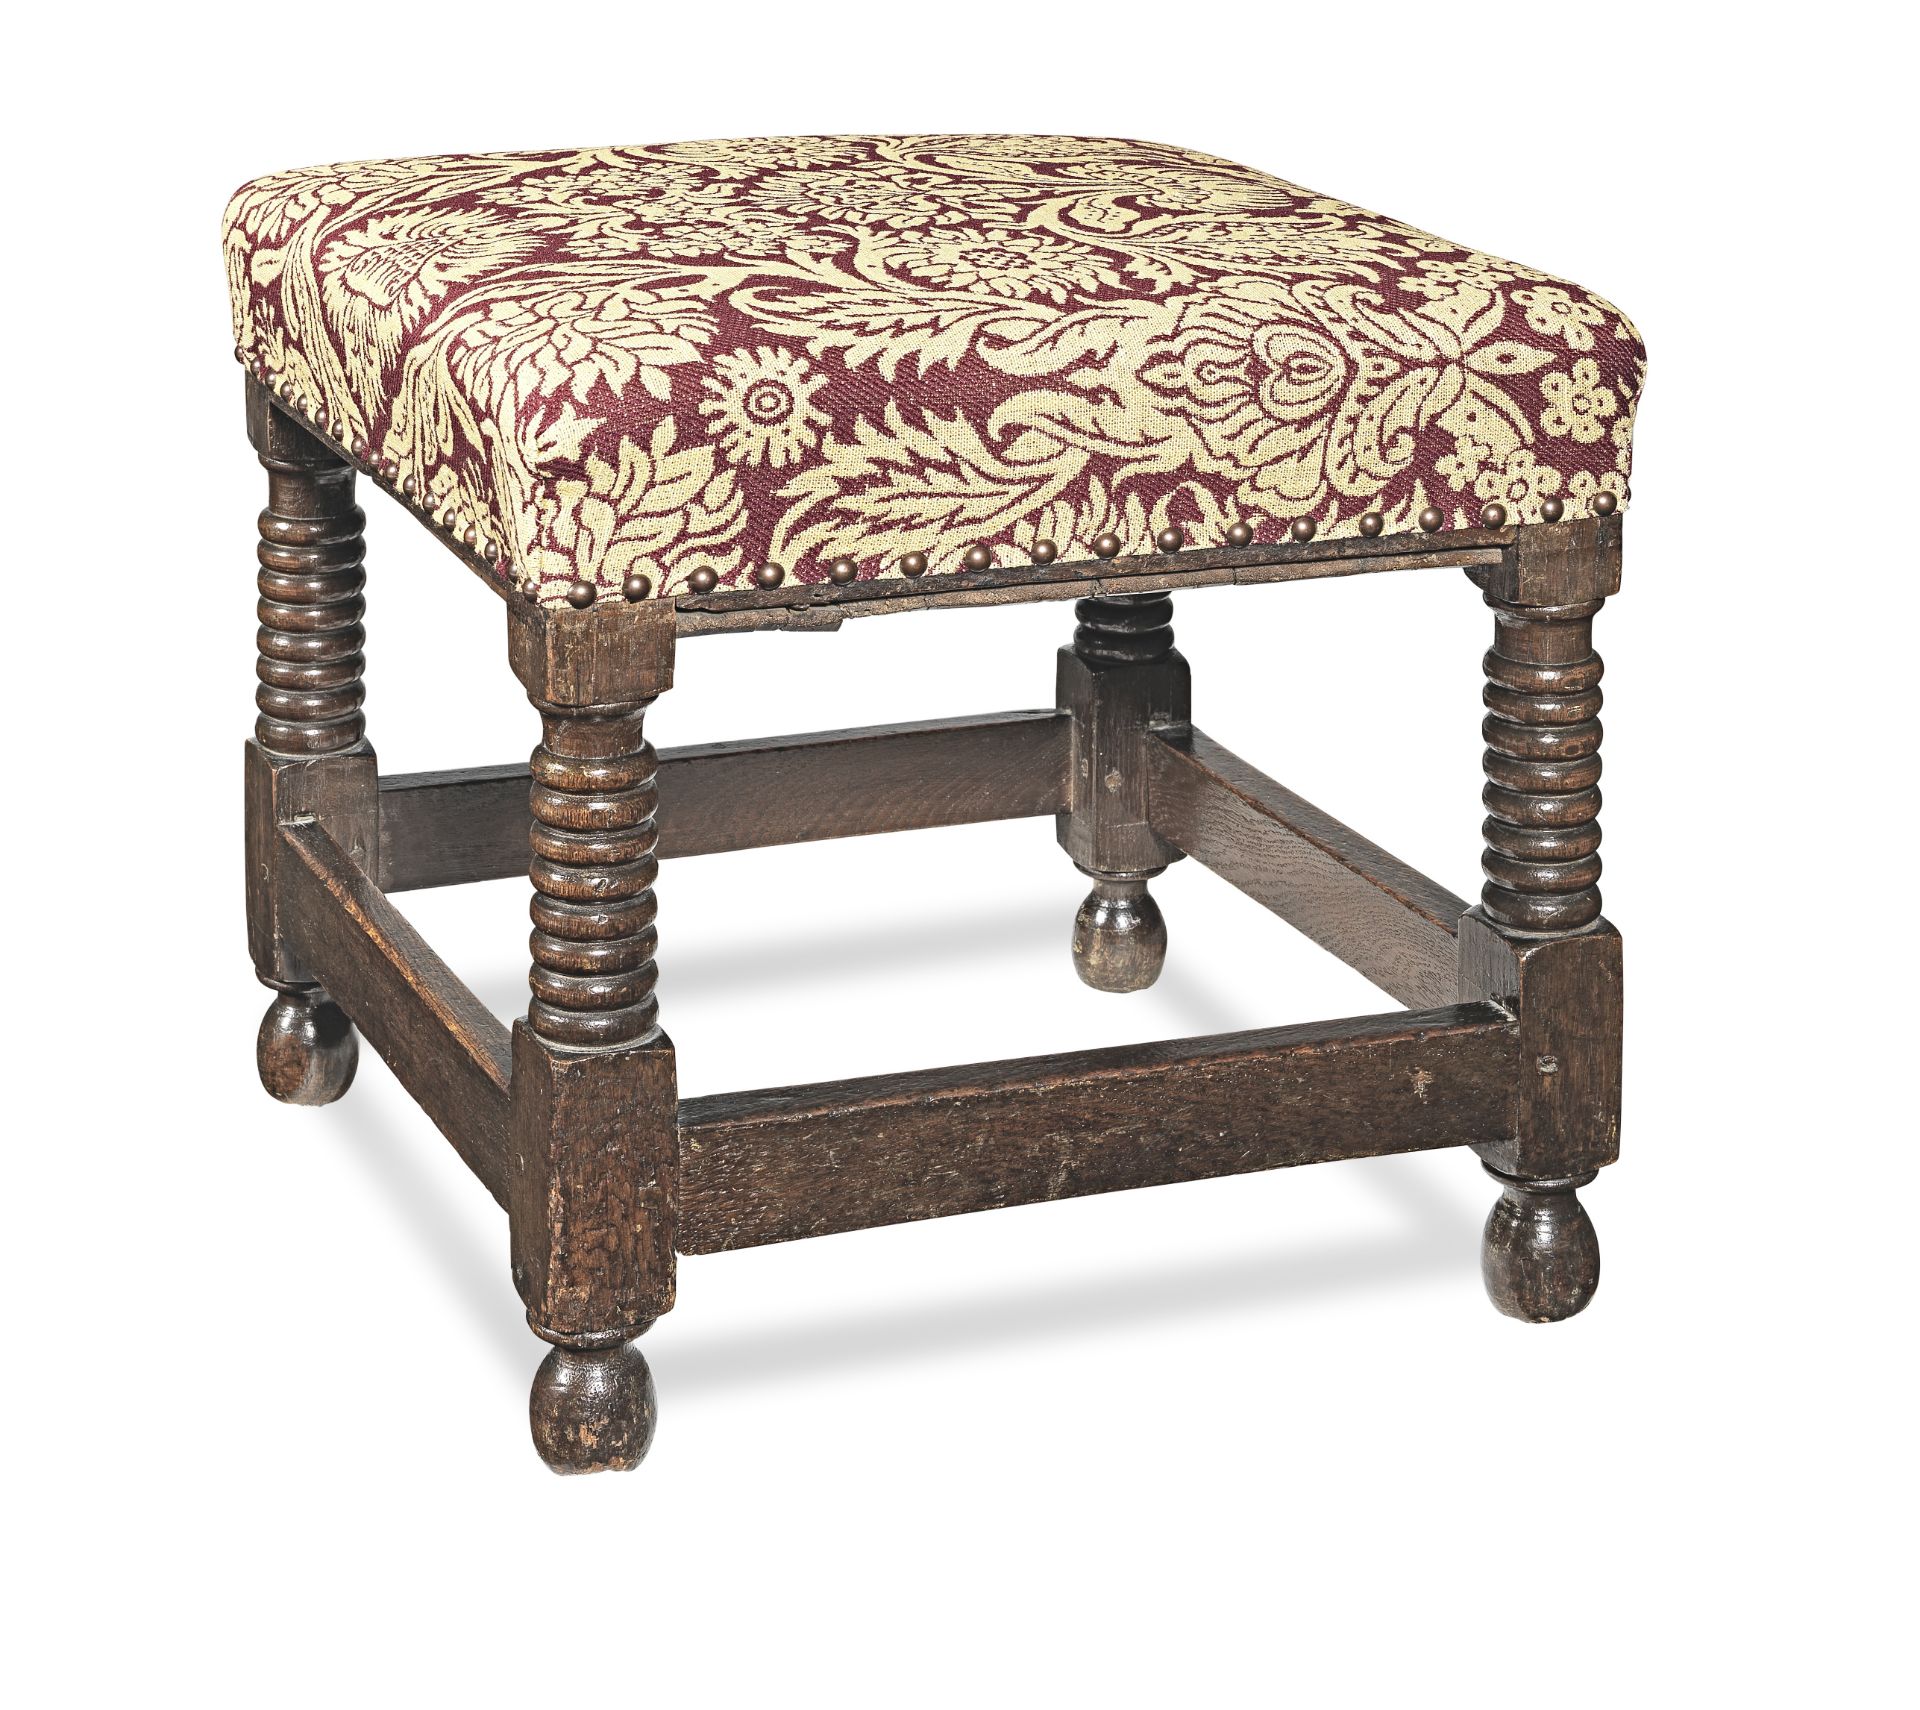 A Charles II joined oak and upholstered stool, circa 1680